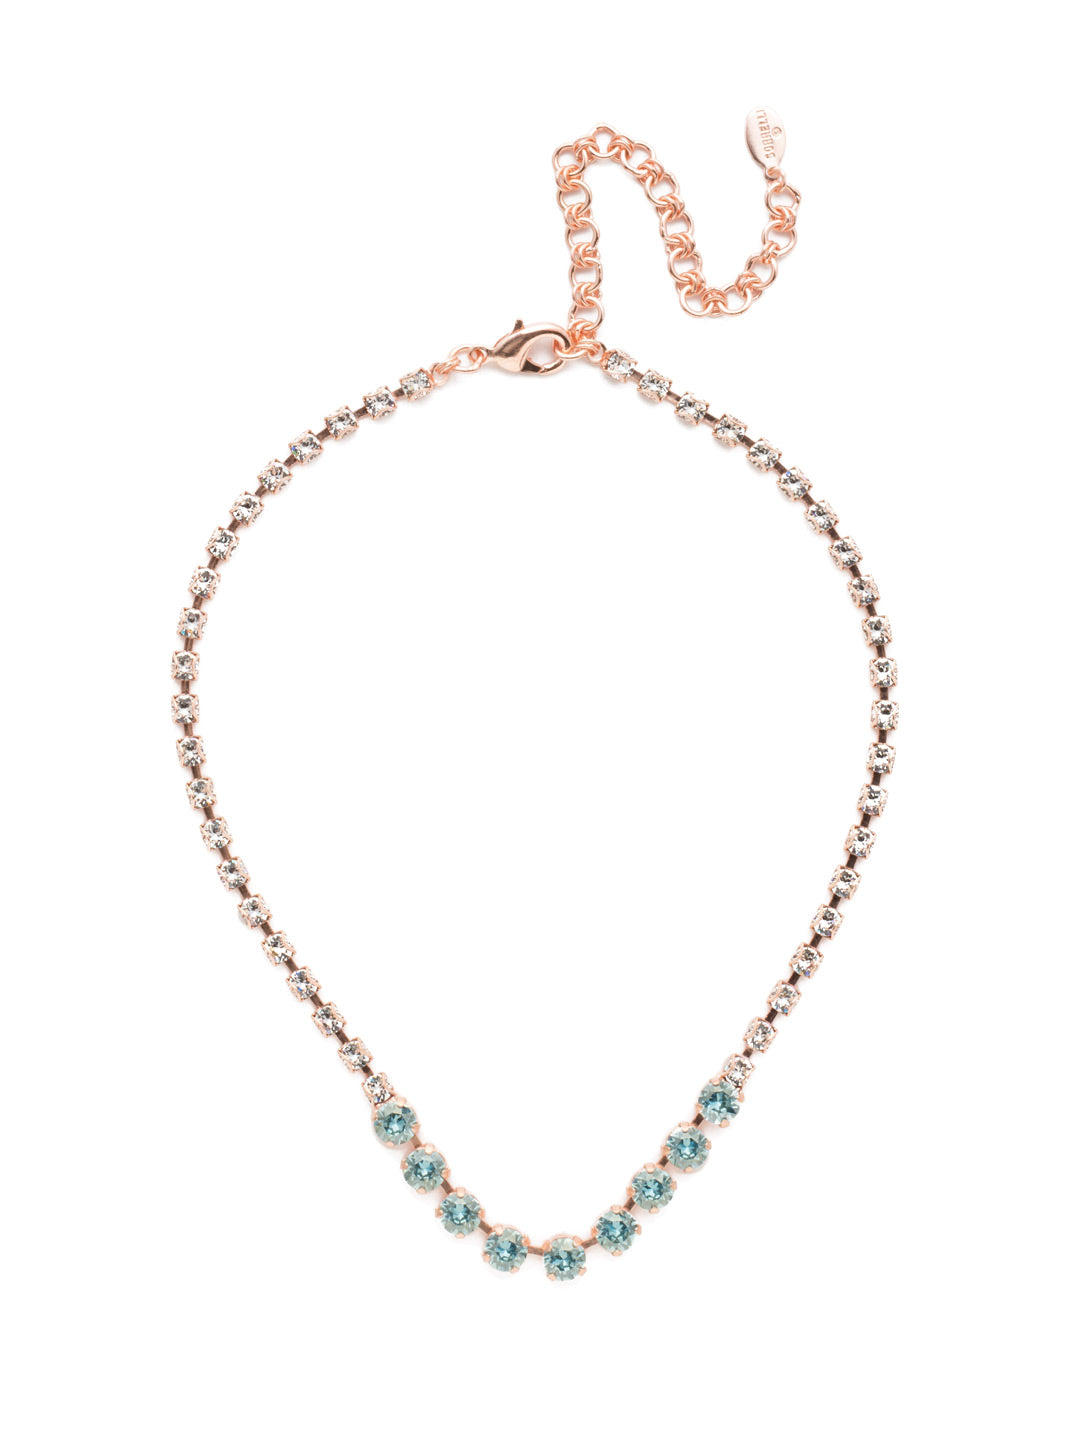 Audriana Tennis Necklace - NET37RGCAZ - The Audriana Tennis Necklace is all about glamour. Shine across any room with the strand entirely encrusted in sparkling crystals, while larger pieces of varying opacities stand front and center. From Sorrelli's Crystal Azure collection in our Rose Gold-tone finish.